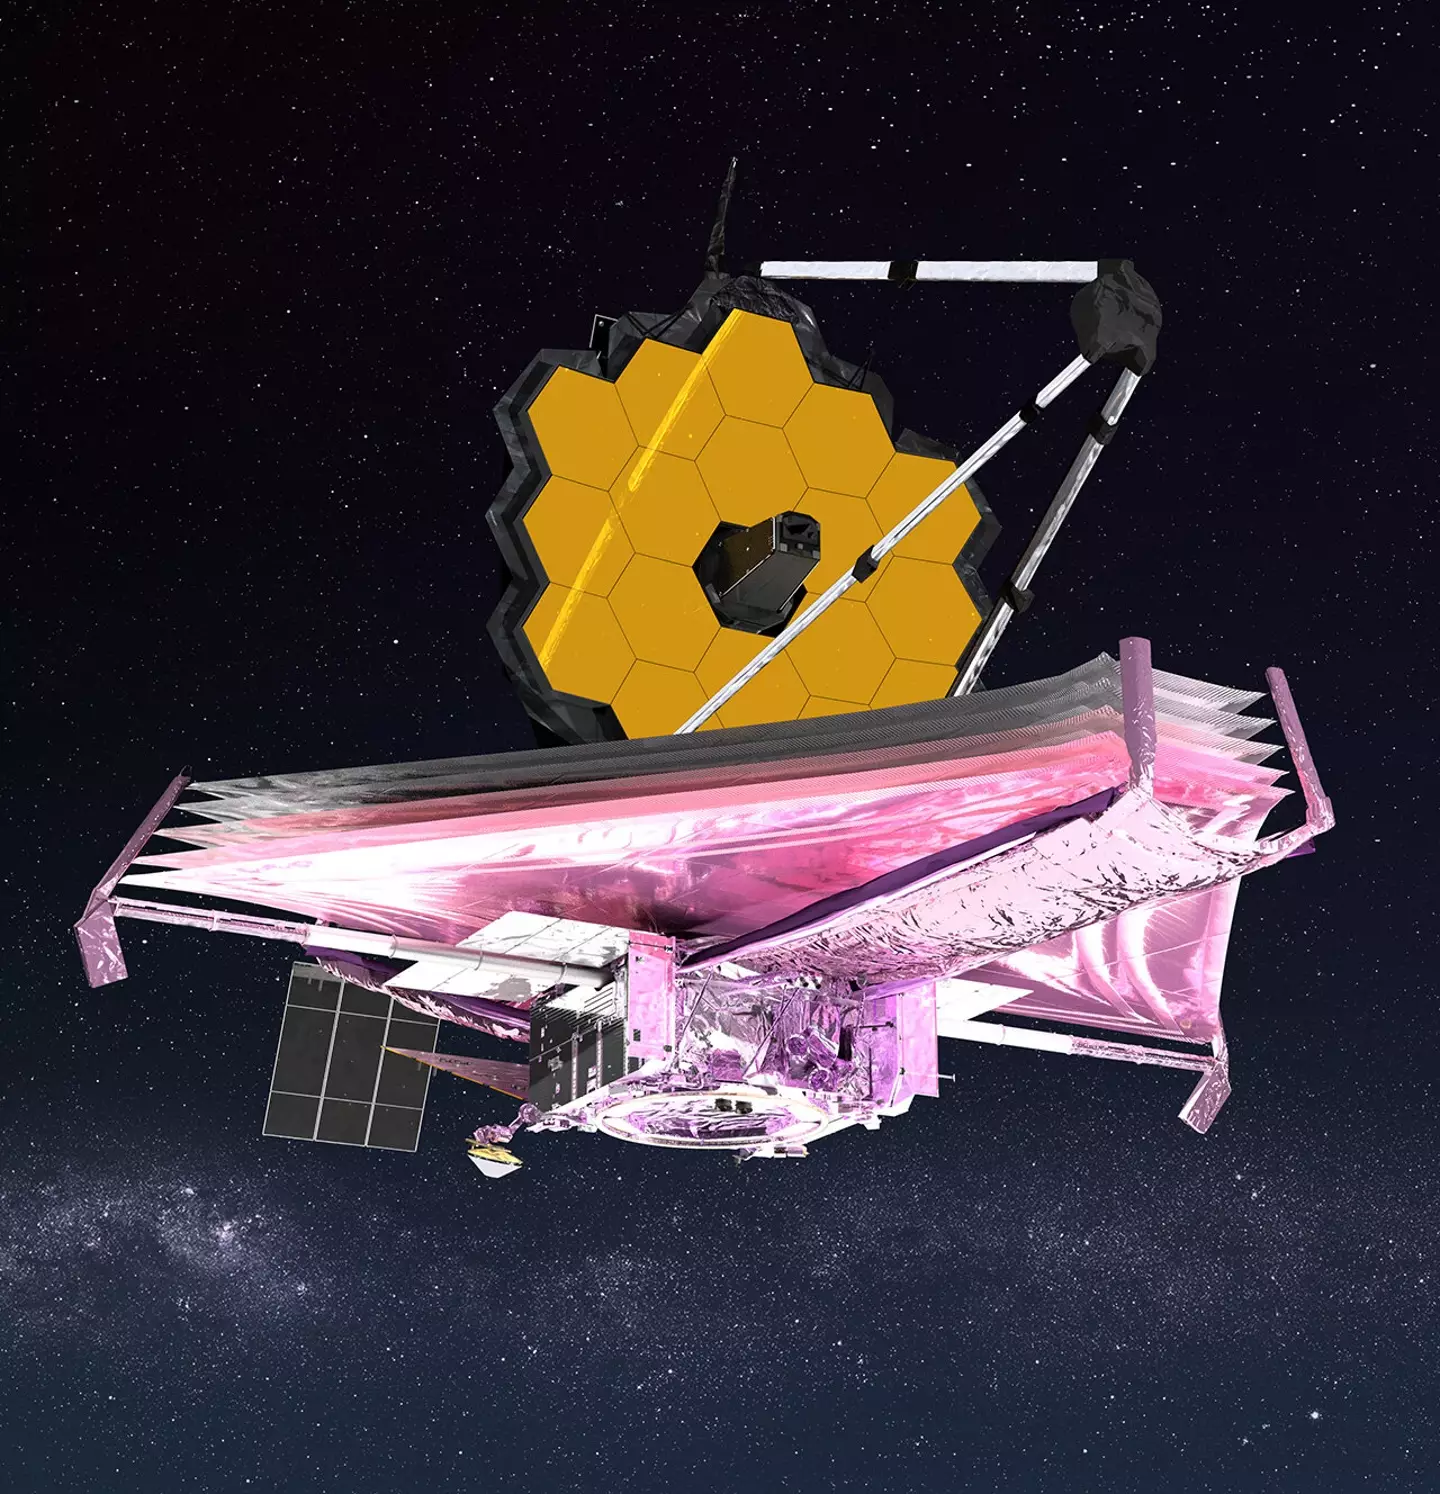 The James Webb Space Telescope (JWST) has captured some incredible images.